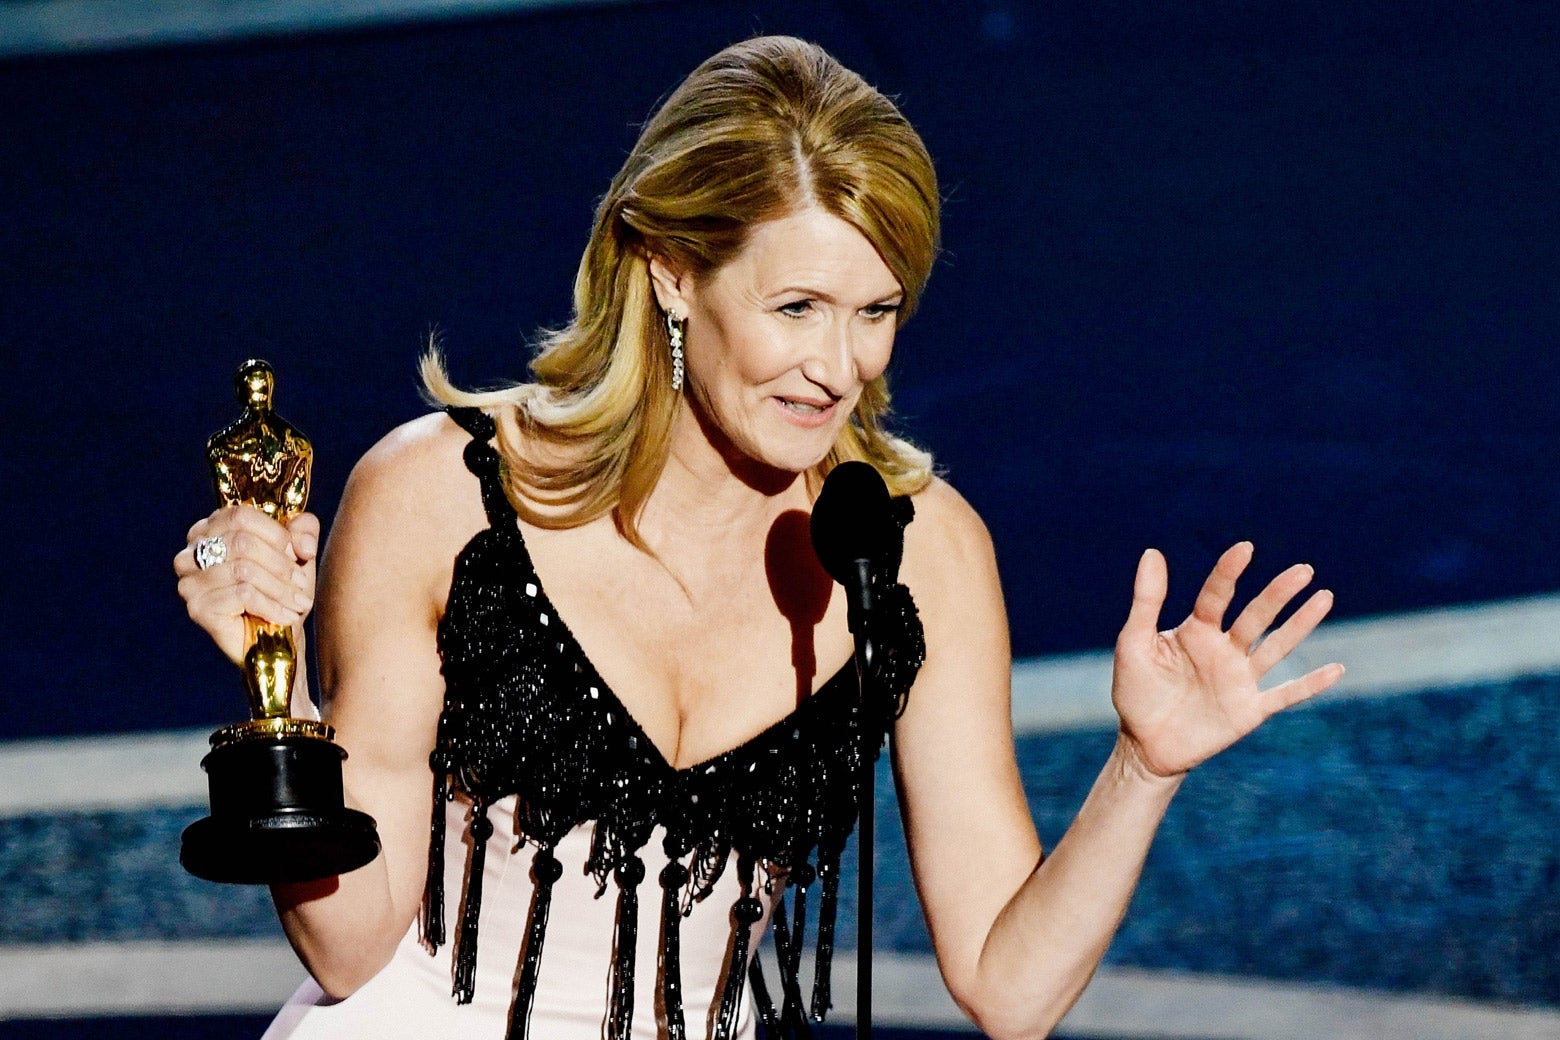 Laura Dern with her statuette